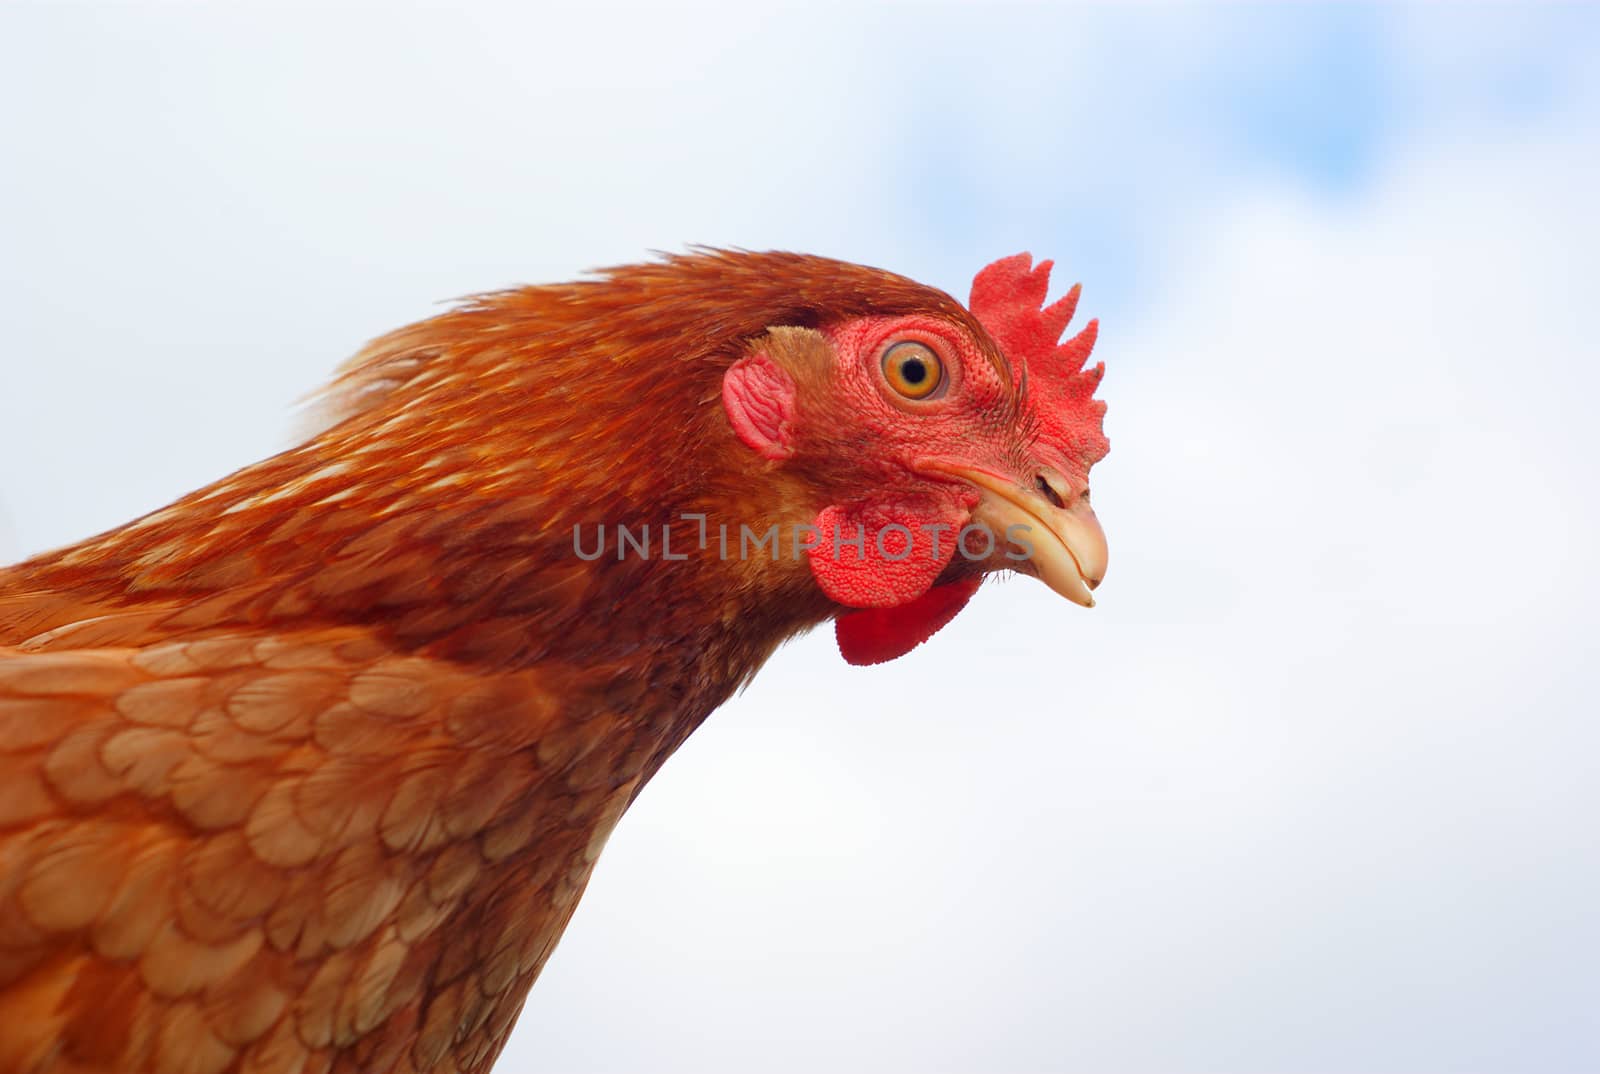 brown chicken hen portrait side view on sky background by jacquesdurocher